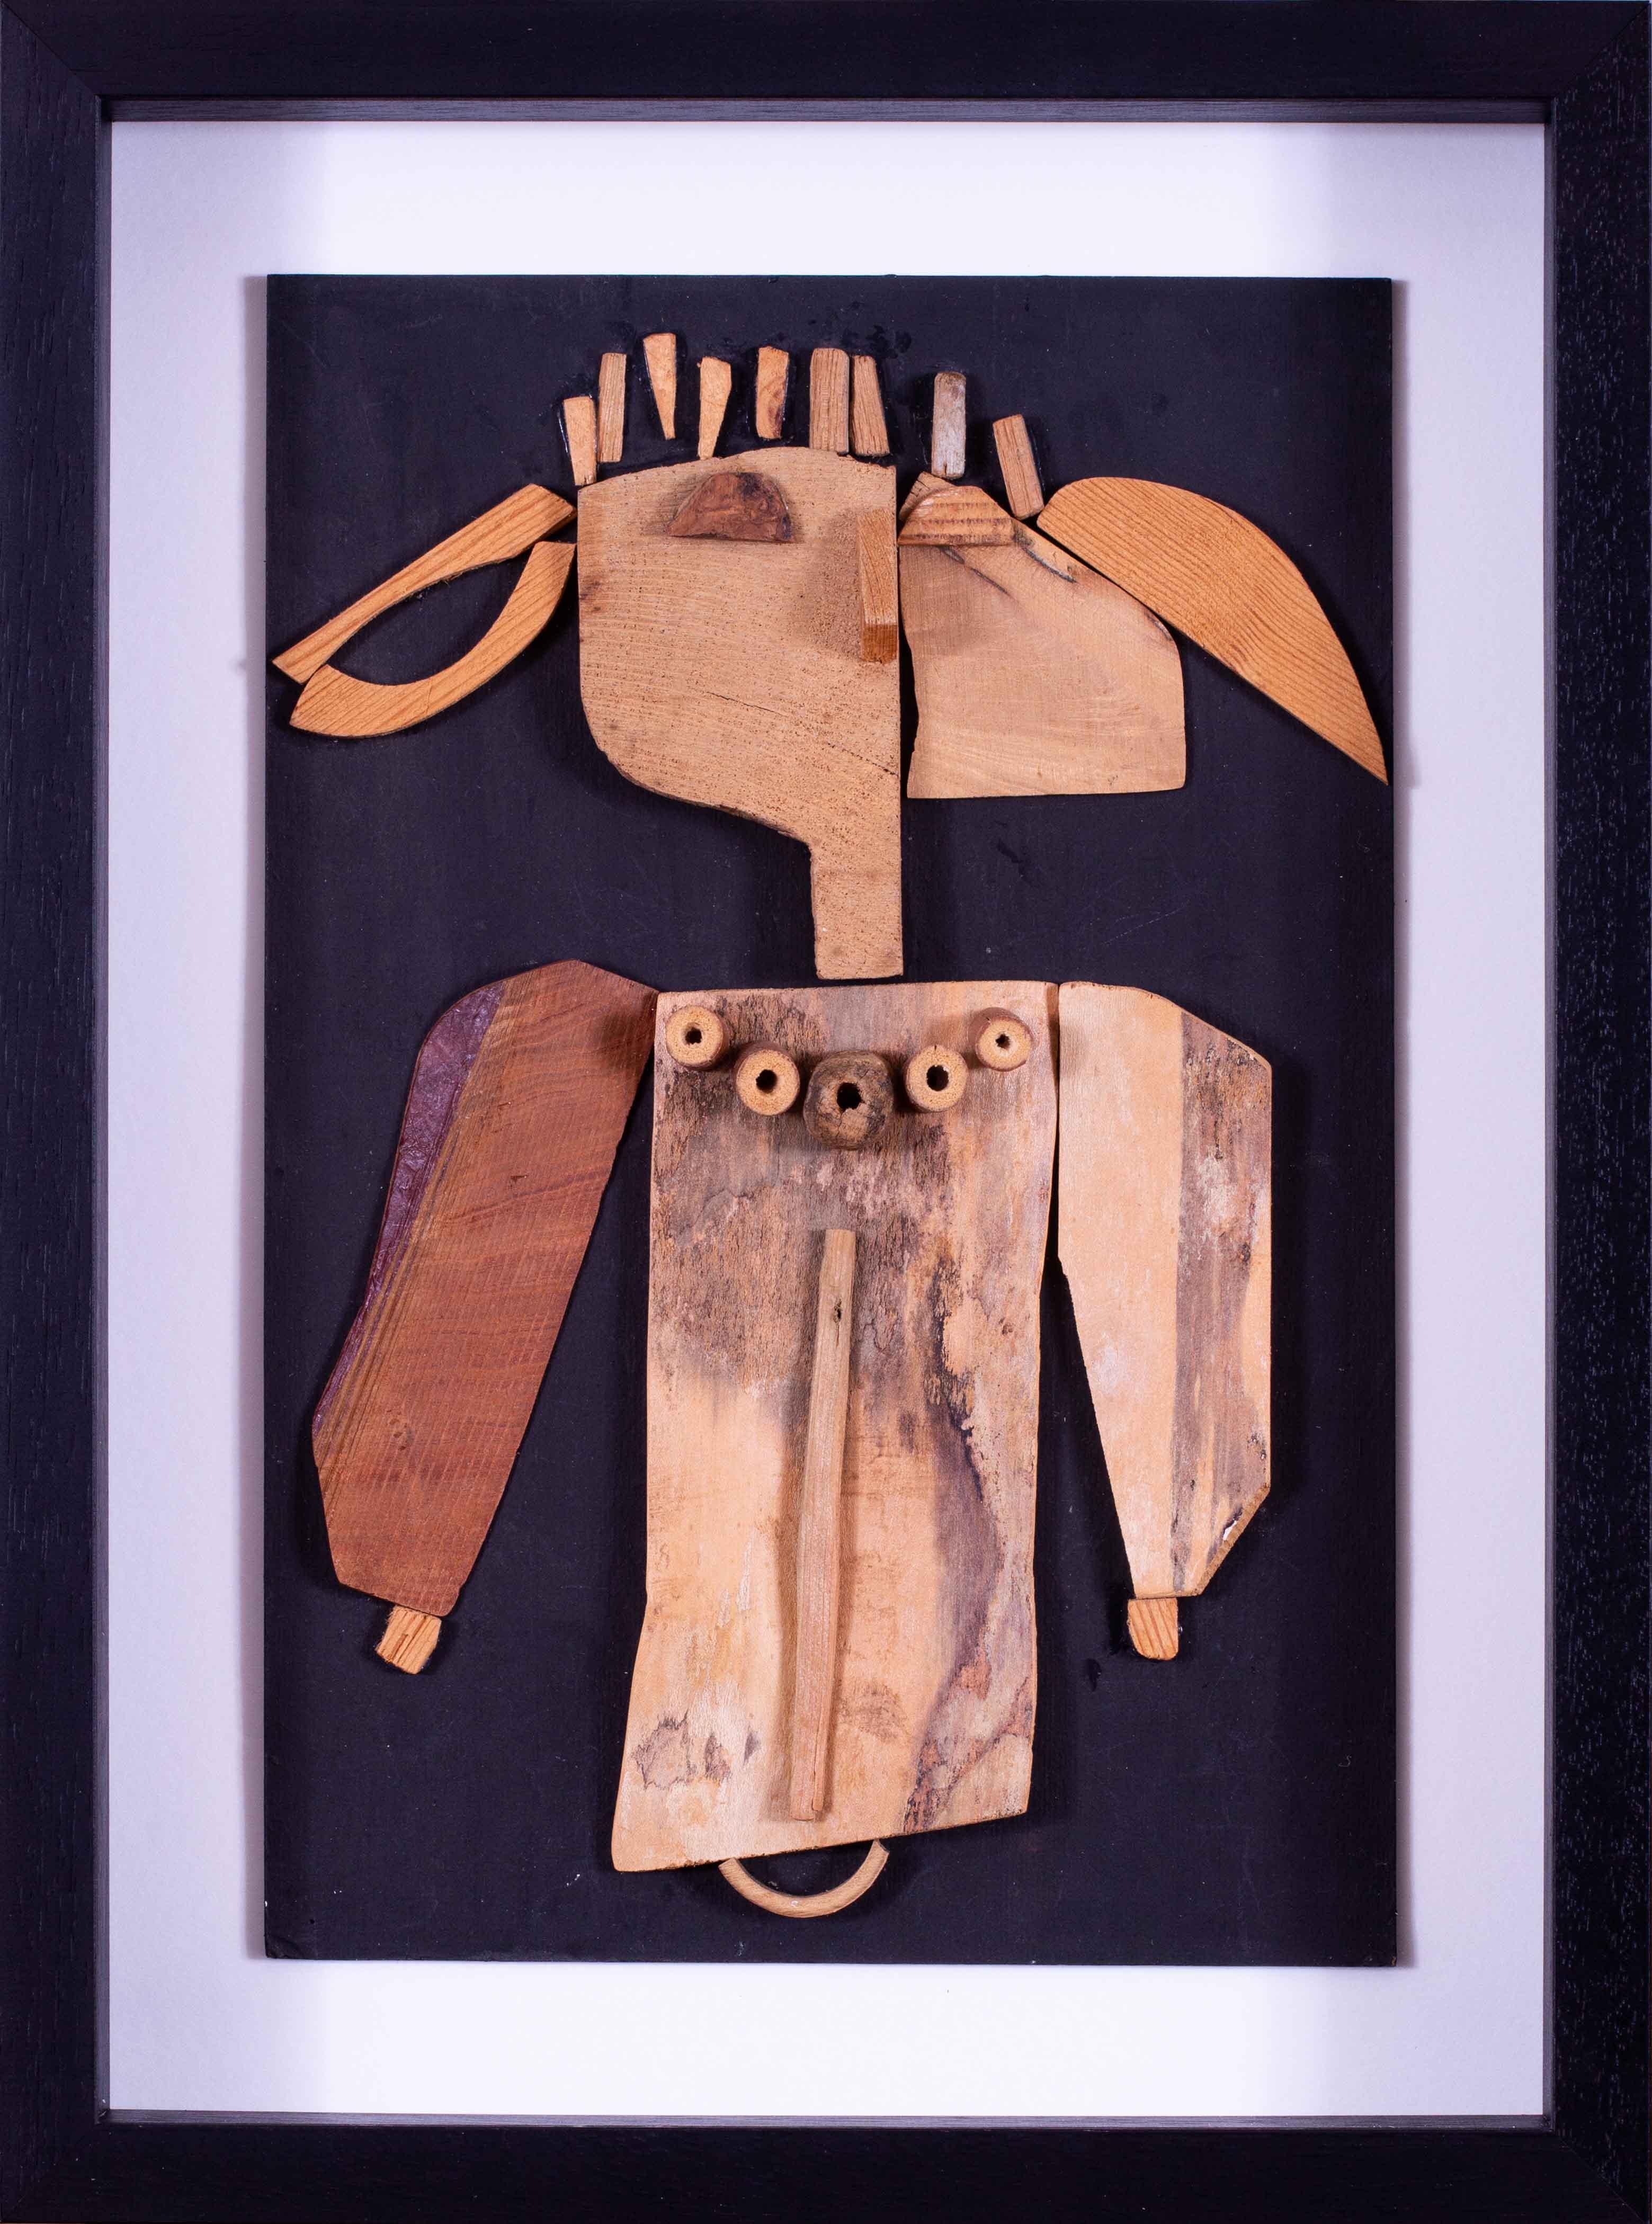 A very original and striking wood collage work by Modern British artist Ewart Johns

Ewart Johns (British, 1923 – 2013)
Forest Figure
Wood collage
Executed circa 2006
19 x 14.1/8 in. (48.3 x 36.3 cm.) Including frame

Ewart was born in Barry,